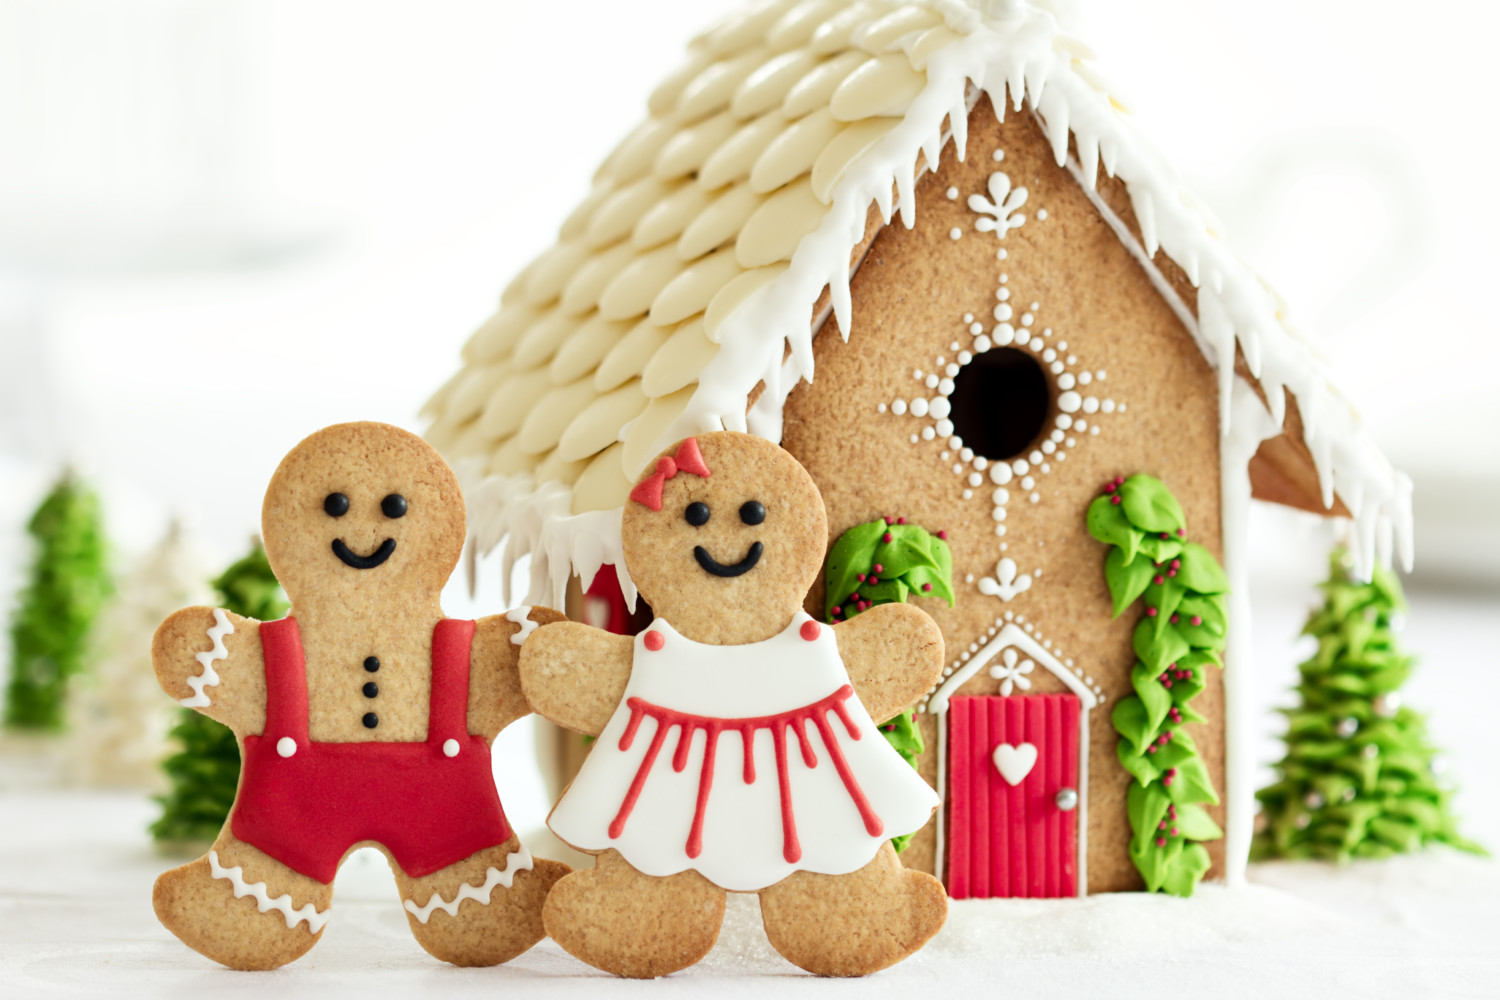 Starbucks Gingerbread Houses Holiday Decorations Food